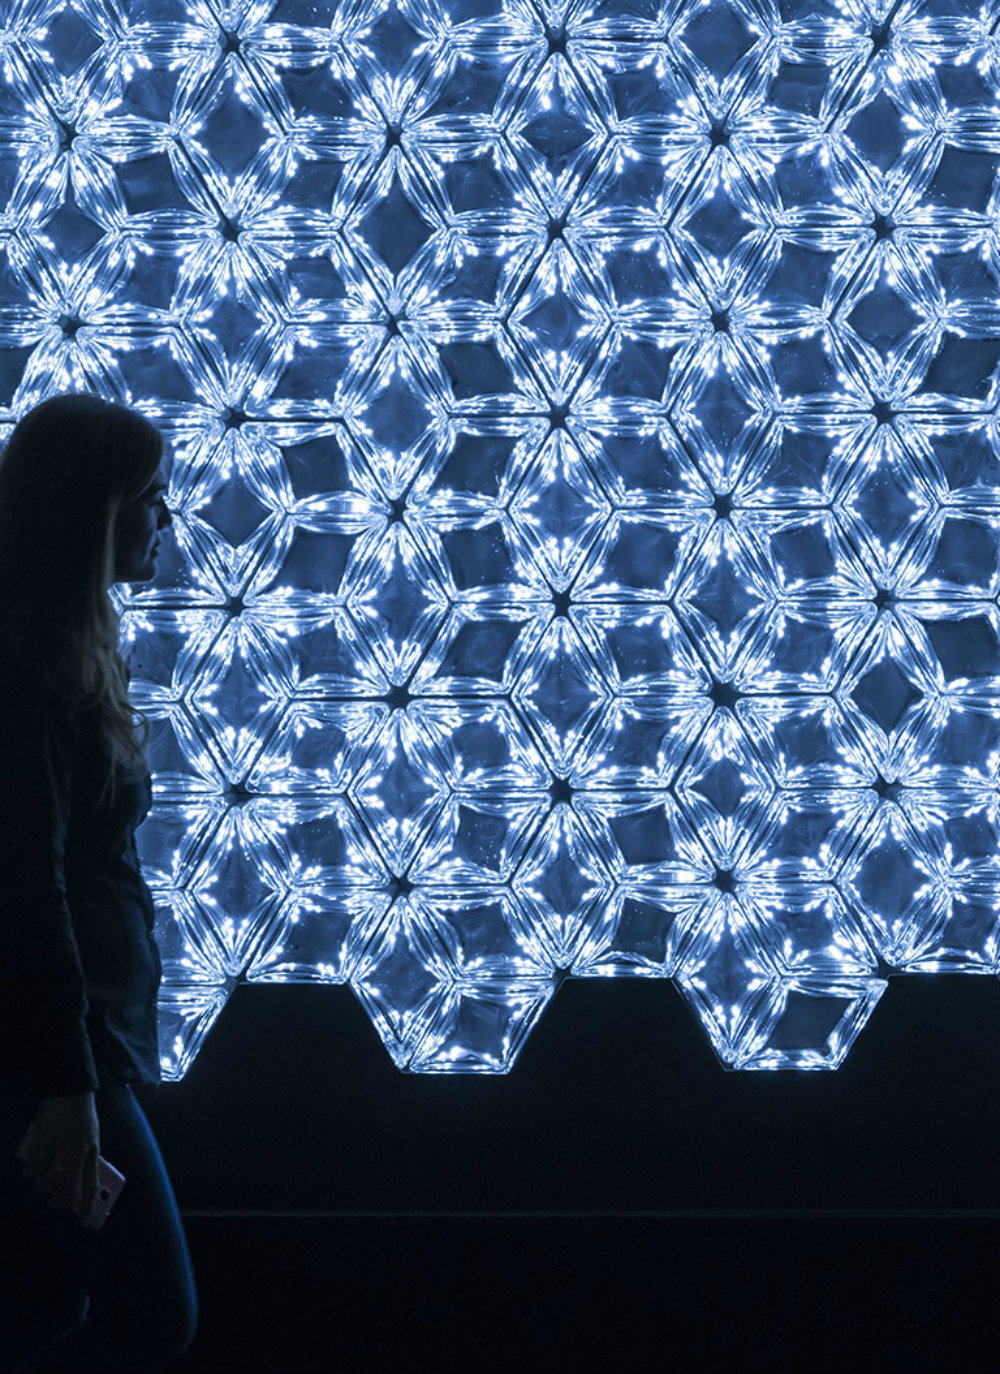 Everything You Need To Know About EuroLuce 2019